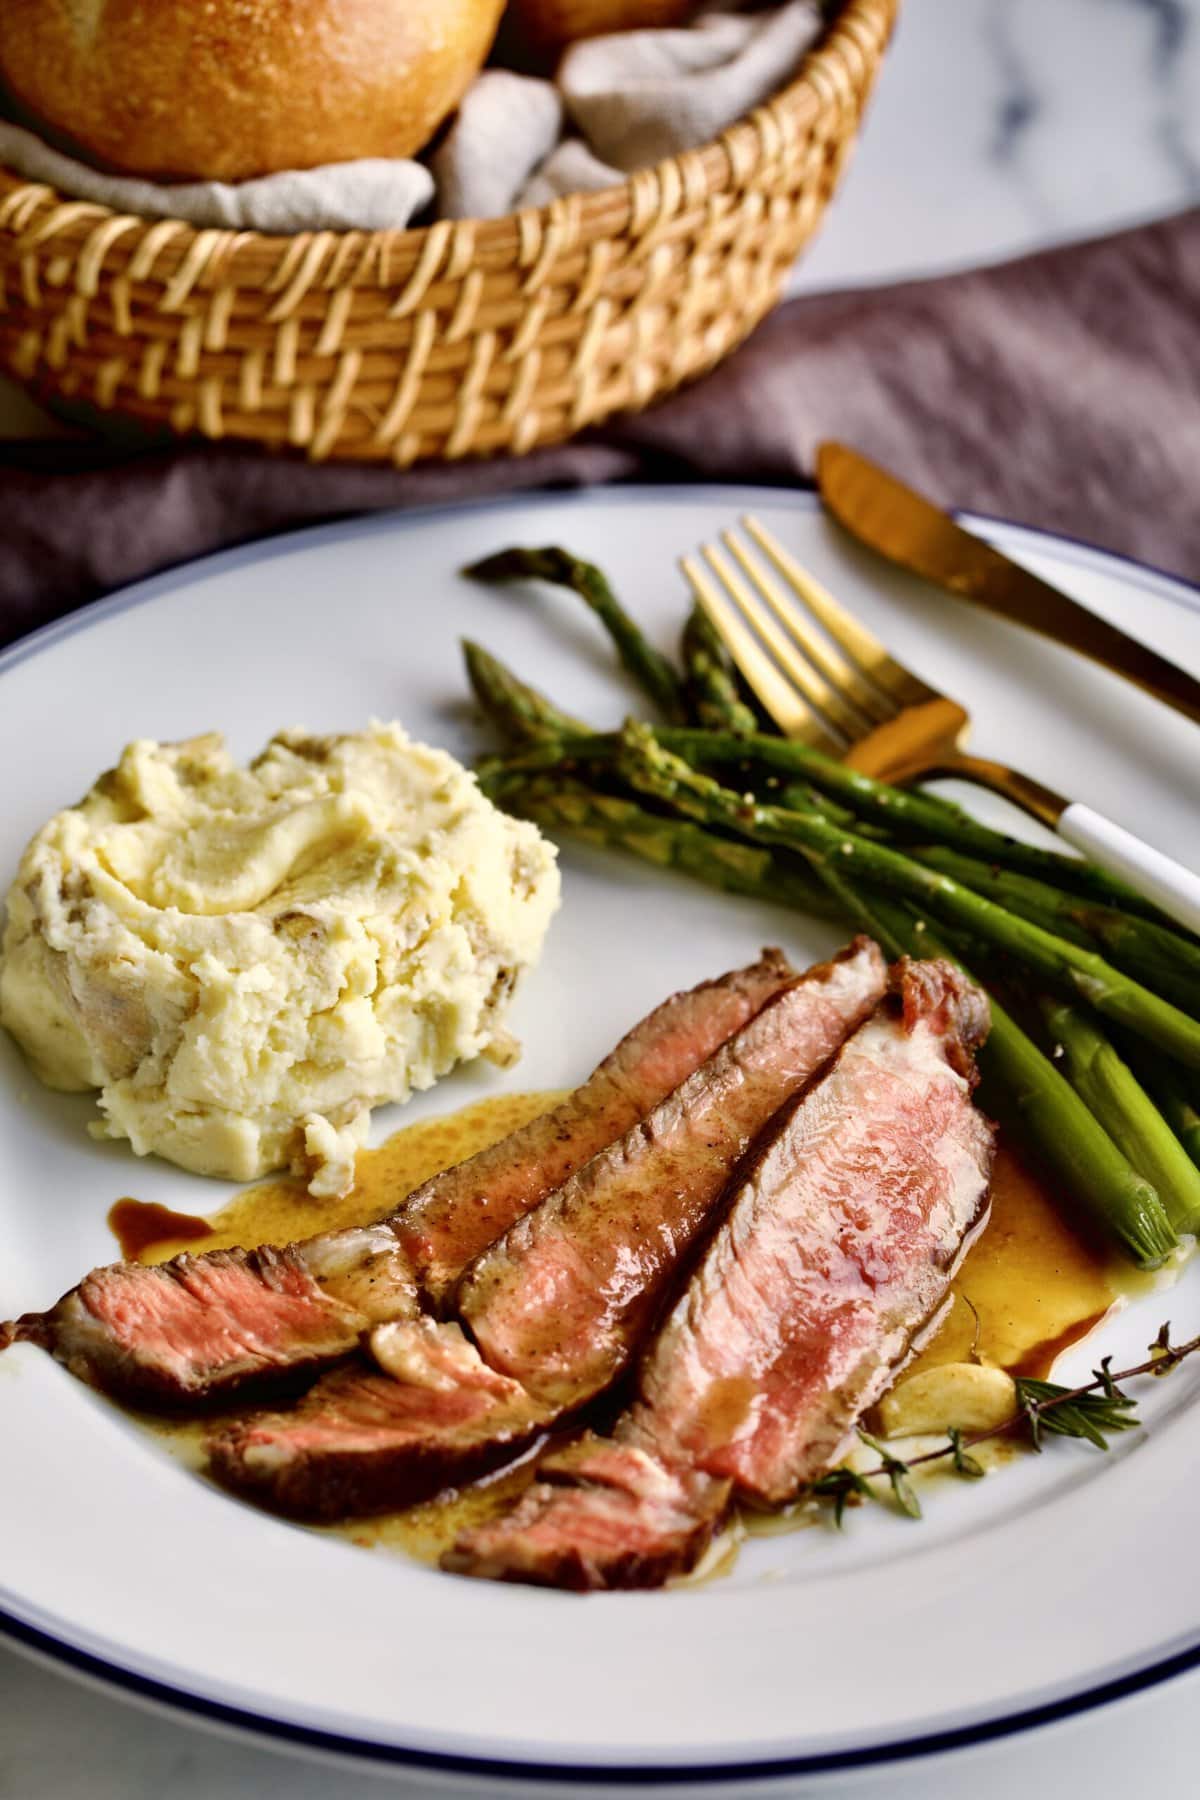 steak slices on a plate with mashed potatoes and asparagus. with fork and knife on the plate.